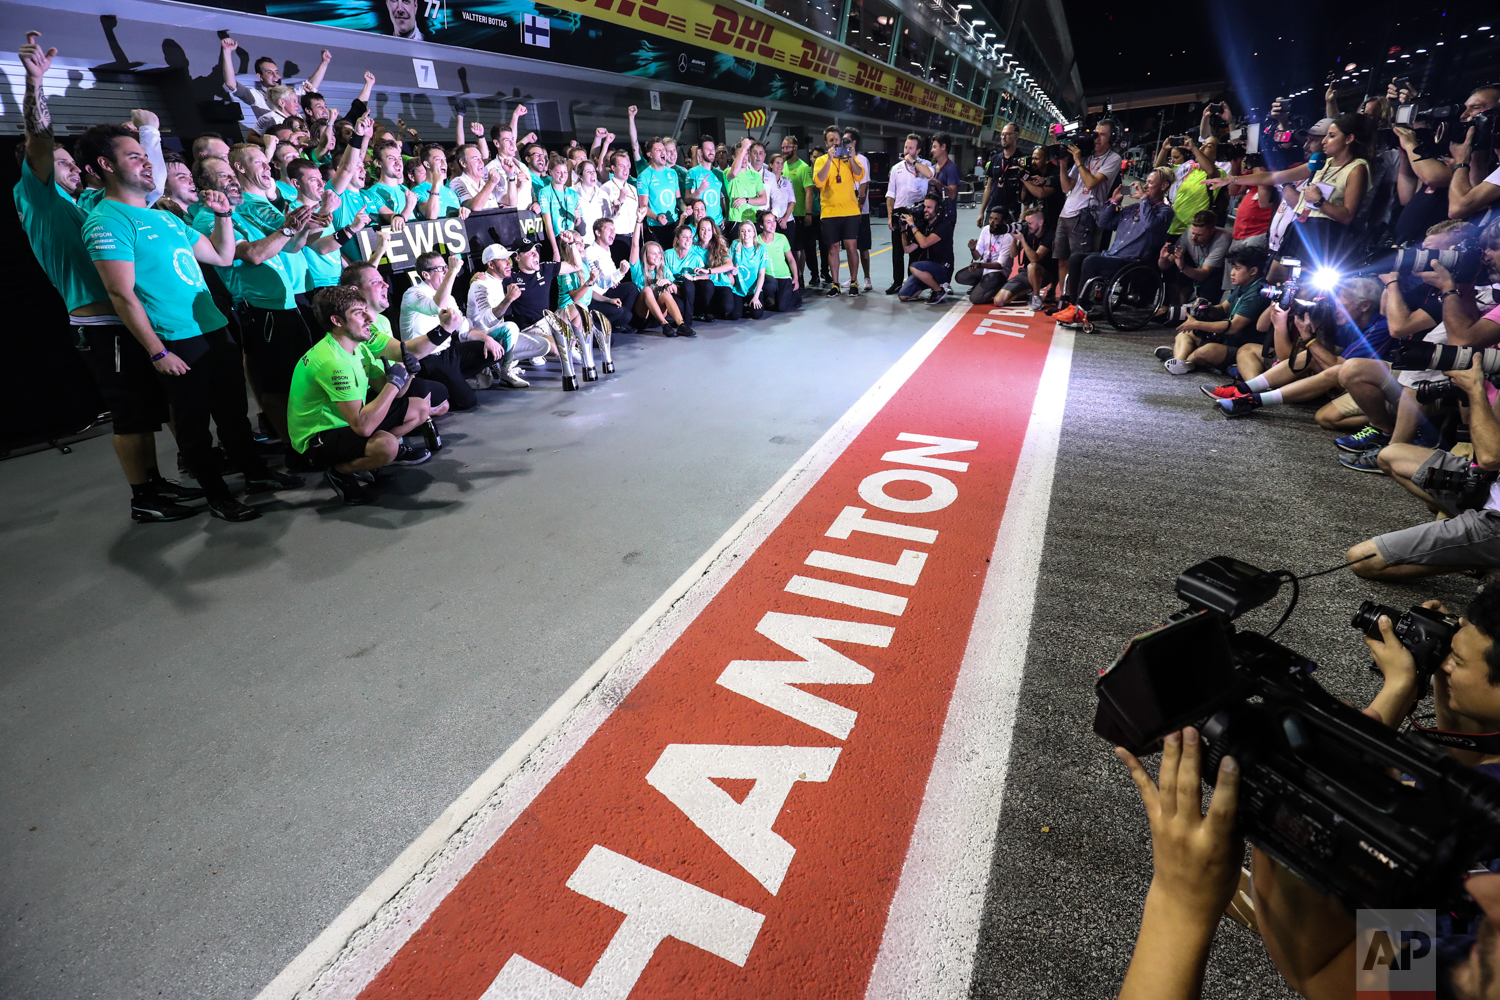  Mercedes driver Lewis Hamilton of Britain and Mercedes driver Valtteri Bottas of Finland celebrate with their team after the Singapore Formula One Grand Prix on the Marina Bay City Circuit Singapore, Sunday, Sept. 17, 2017. Hamilton won the race whi